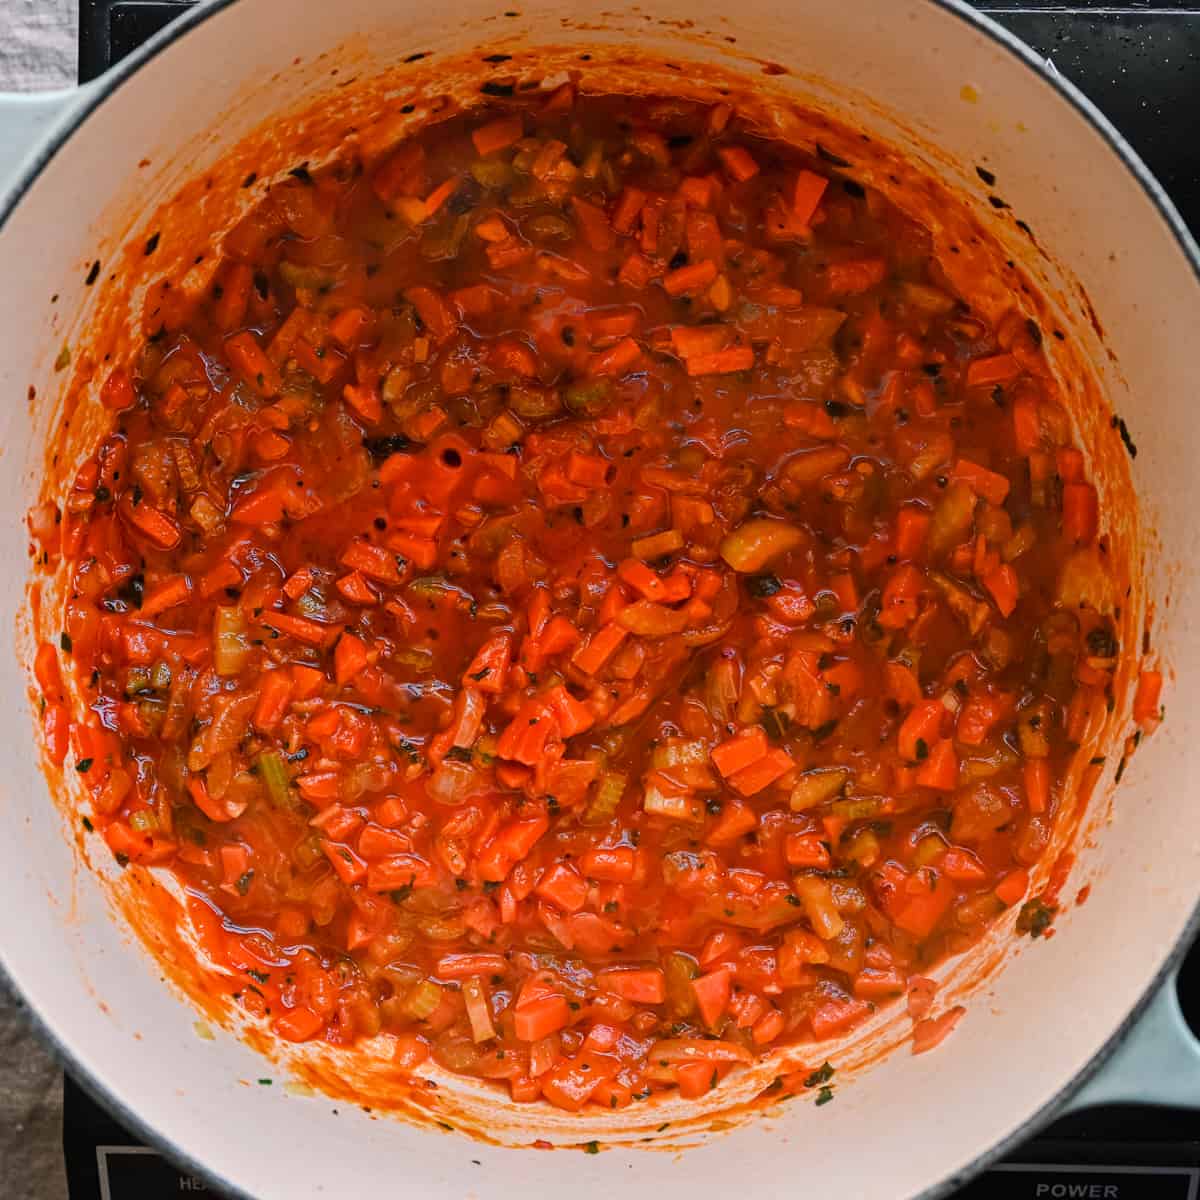 white wine simmering in tomato paste and carrots for italian stew